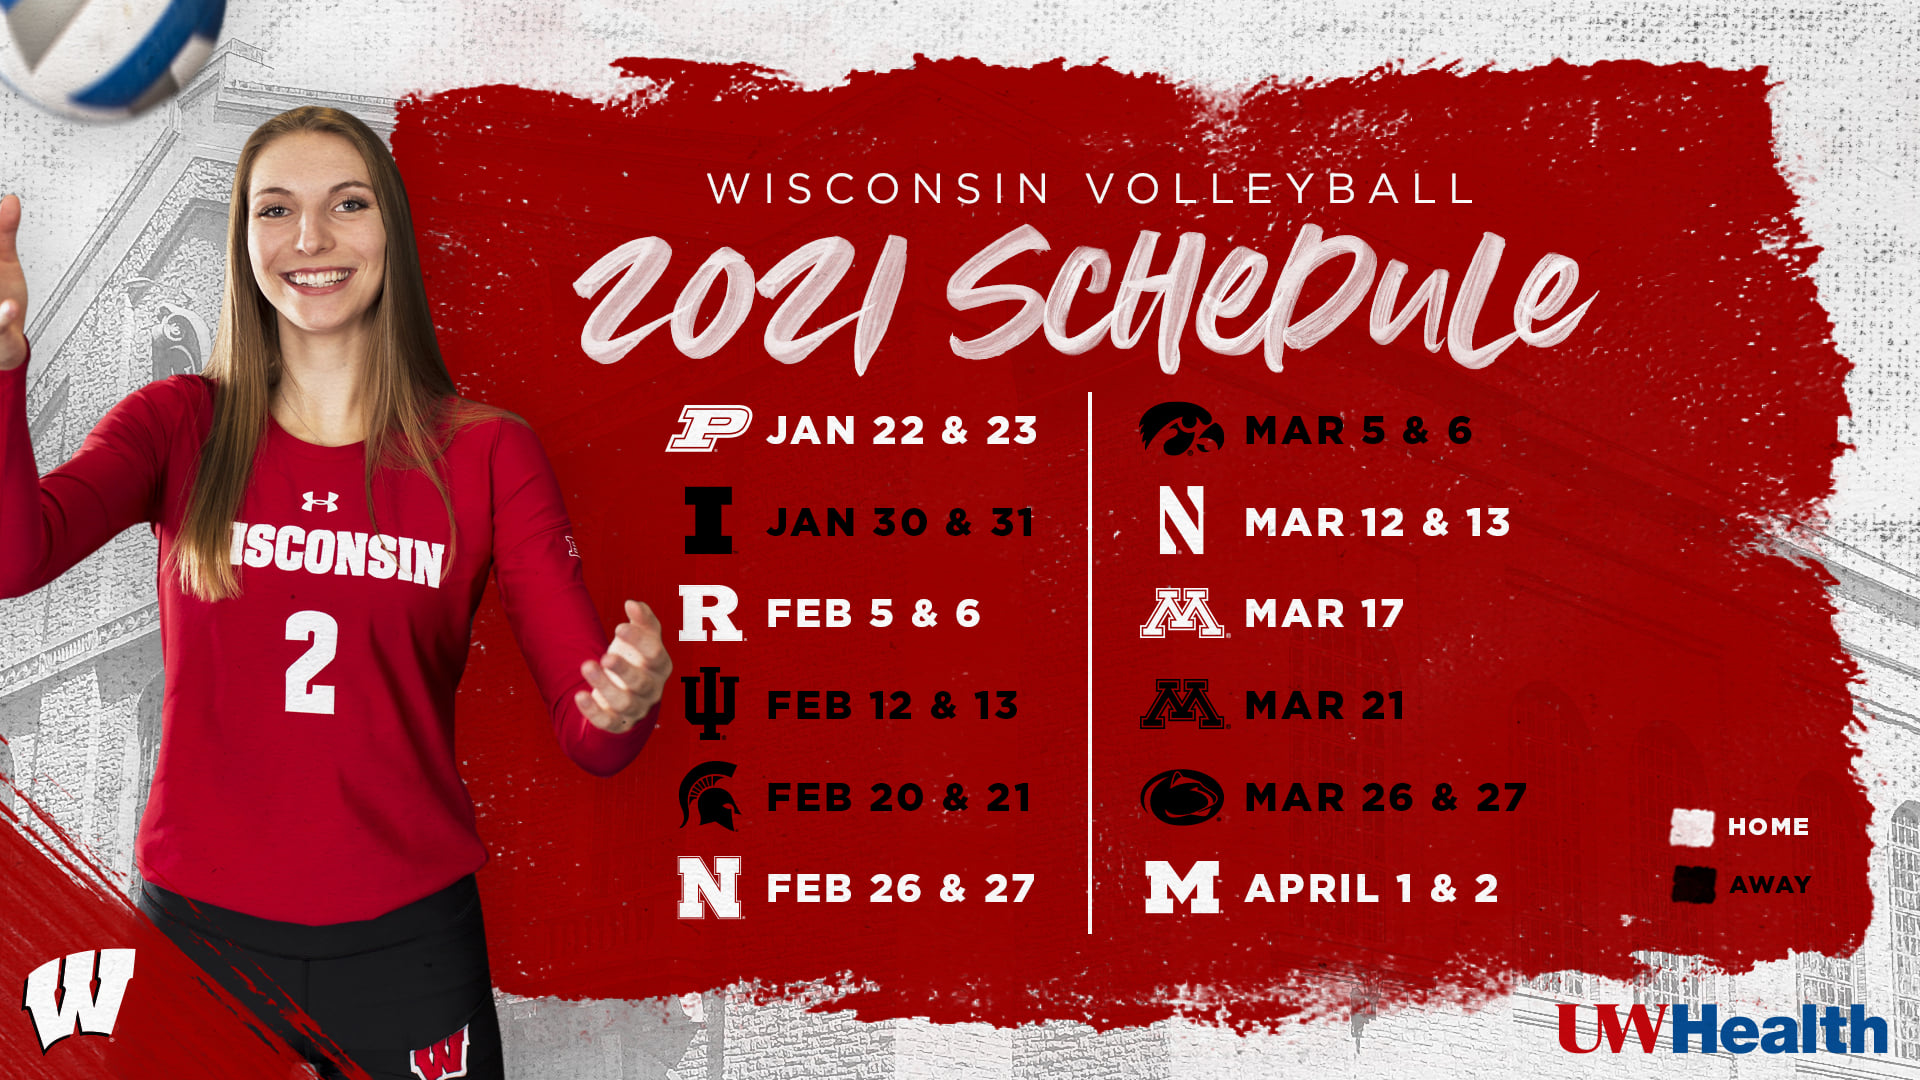 Women’s spring volleyball season starting with Badgers No. 1